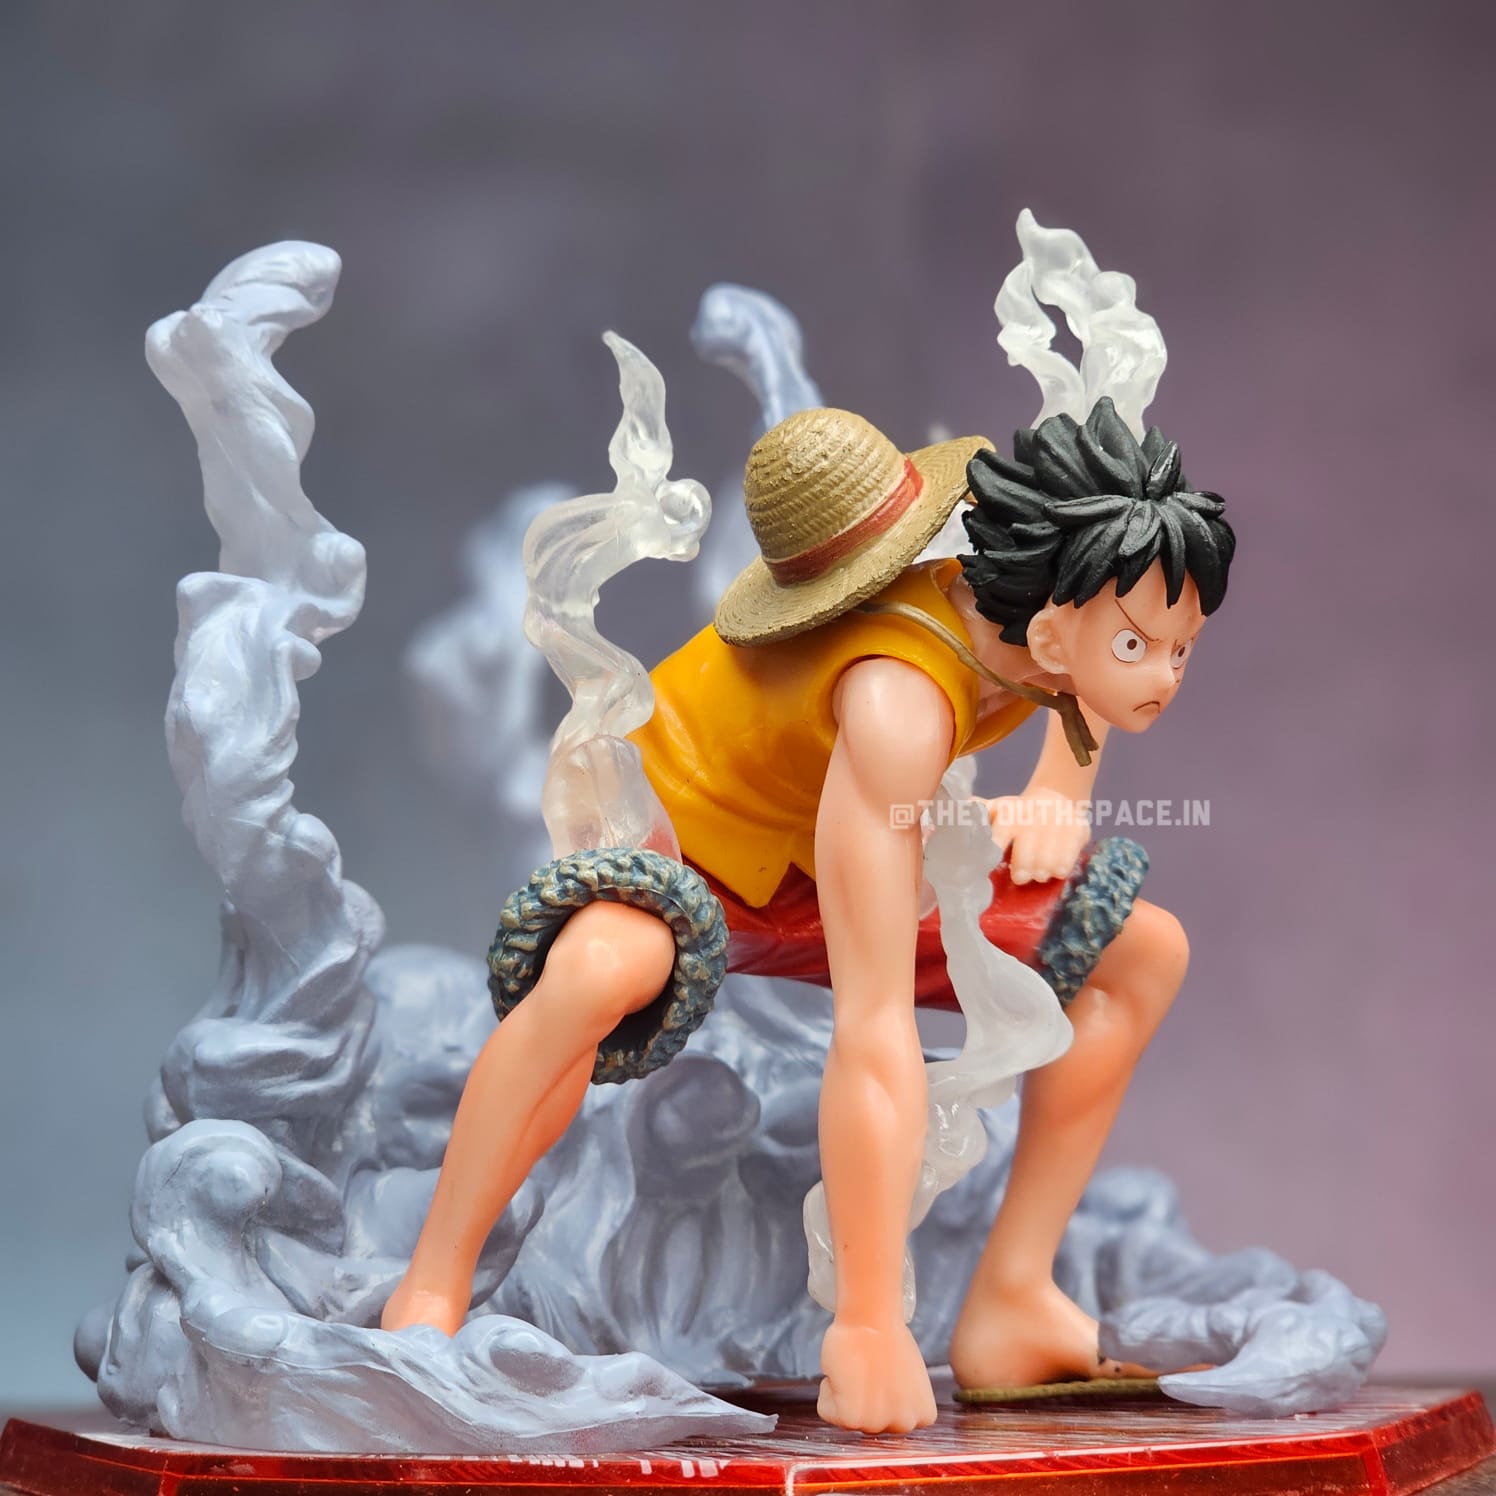 Gear 2 Luffy Action Figure - One Piece.